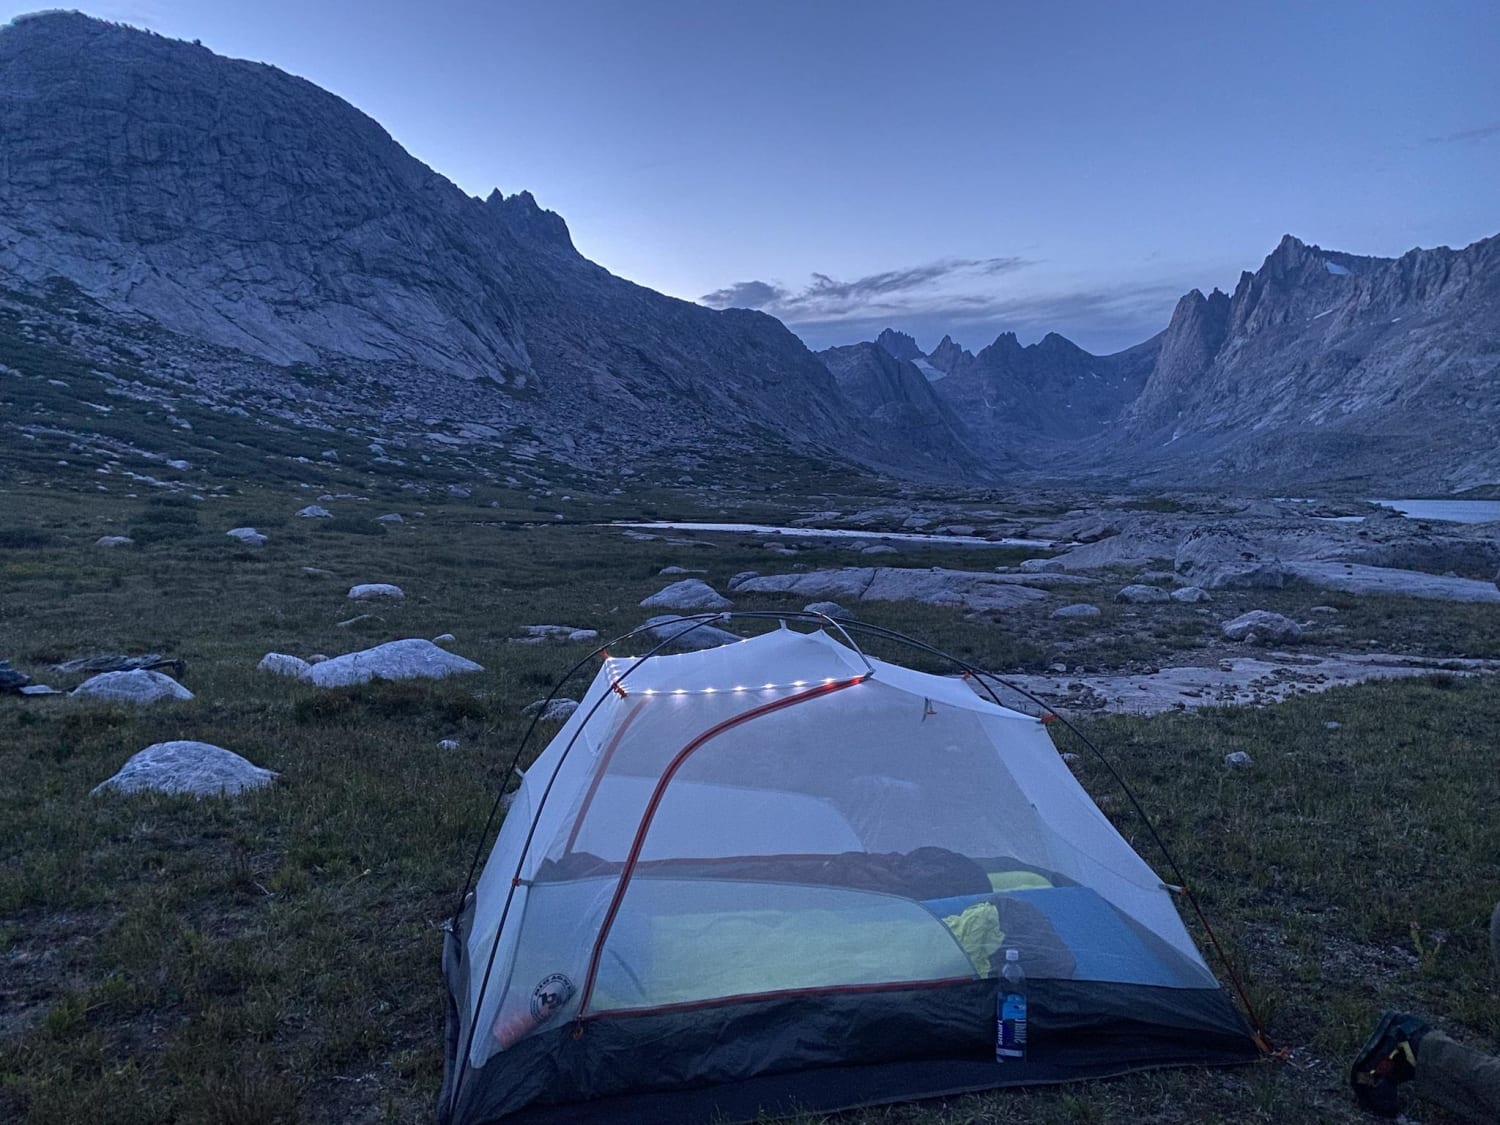 Our cozy campsite on day 3 of a 6 day trip. Tit comb basin and beyond in the wind river range of Wyoming.